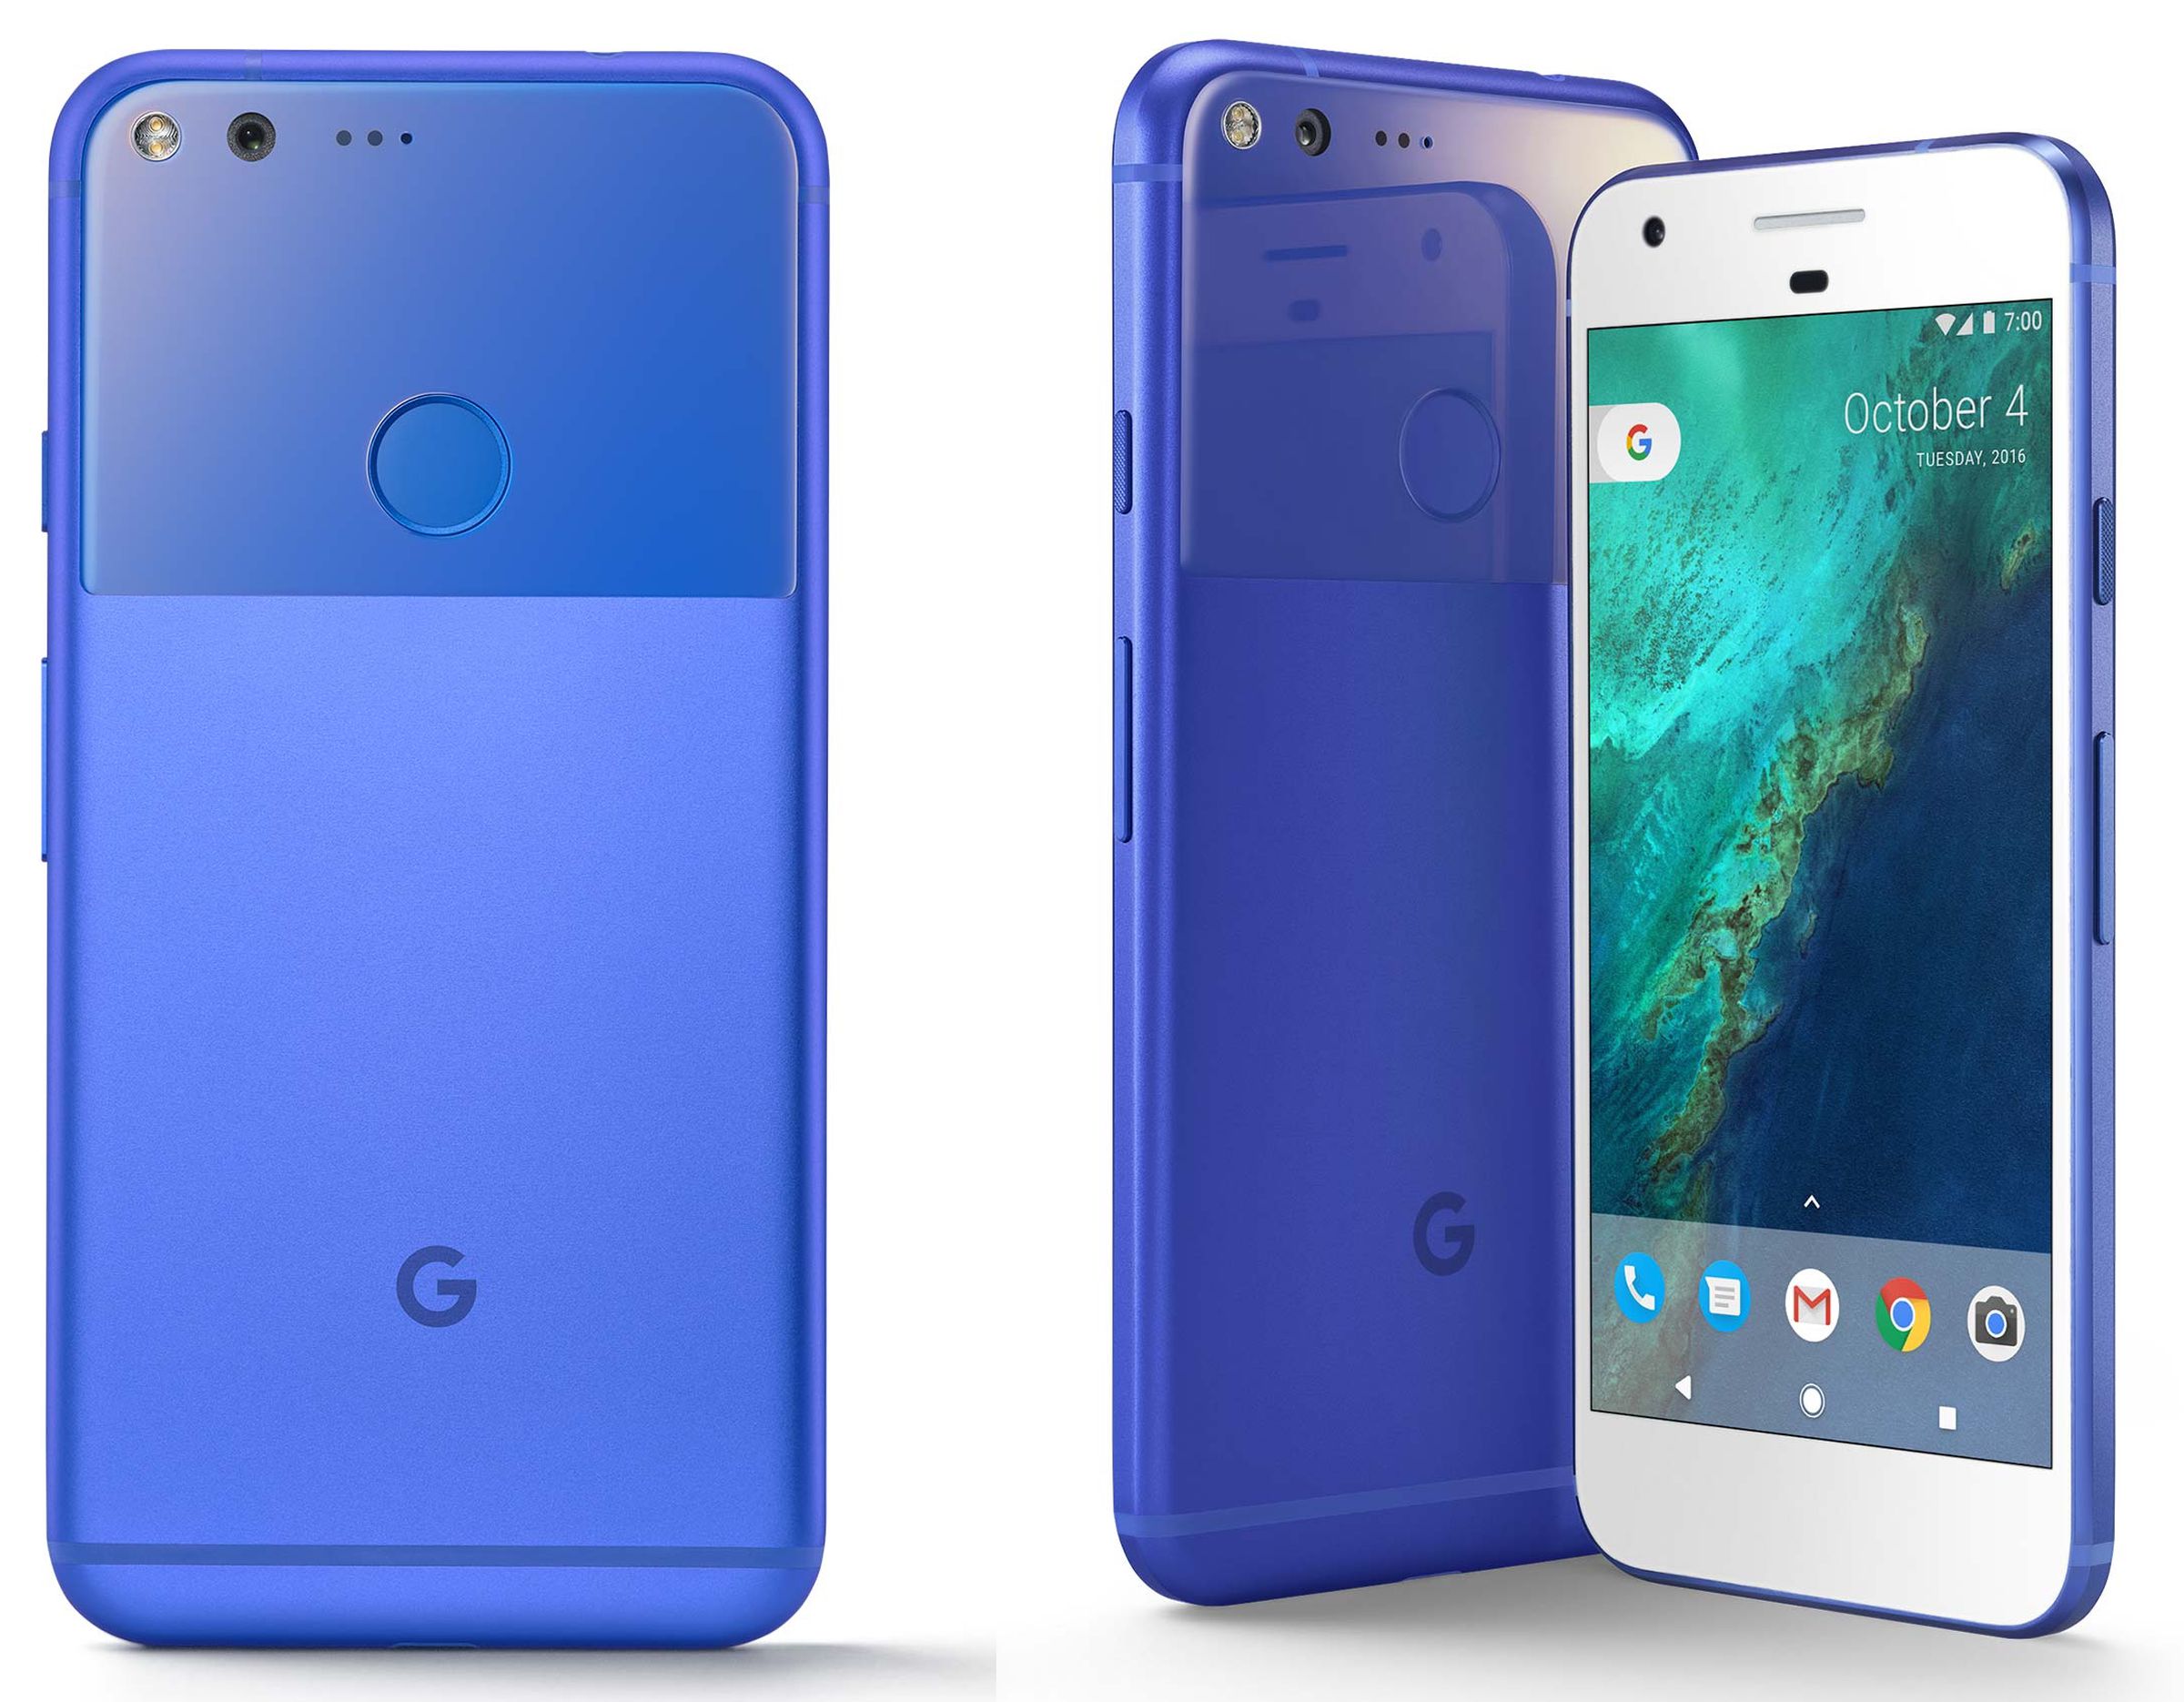 The original Pixel came in a “Really Blue” color, and yes.. it was very blue indeed.